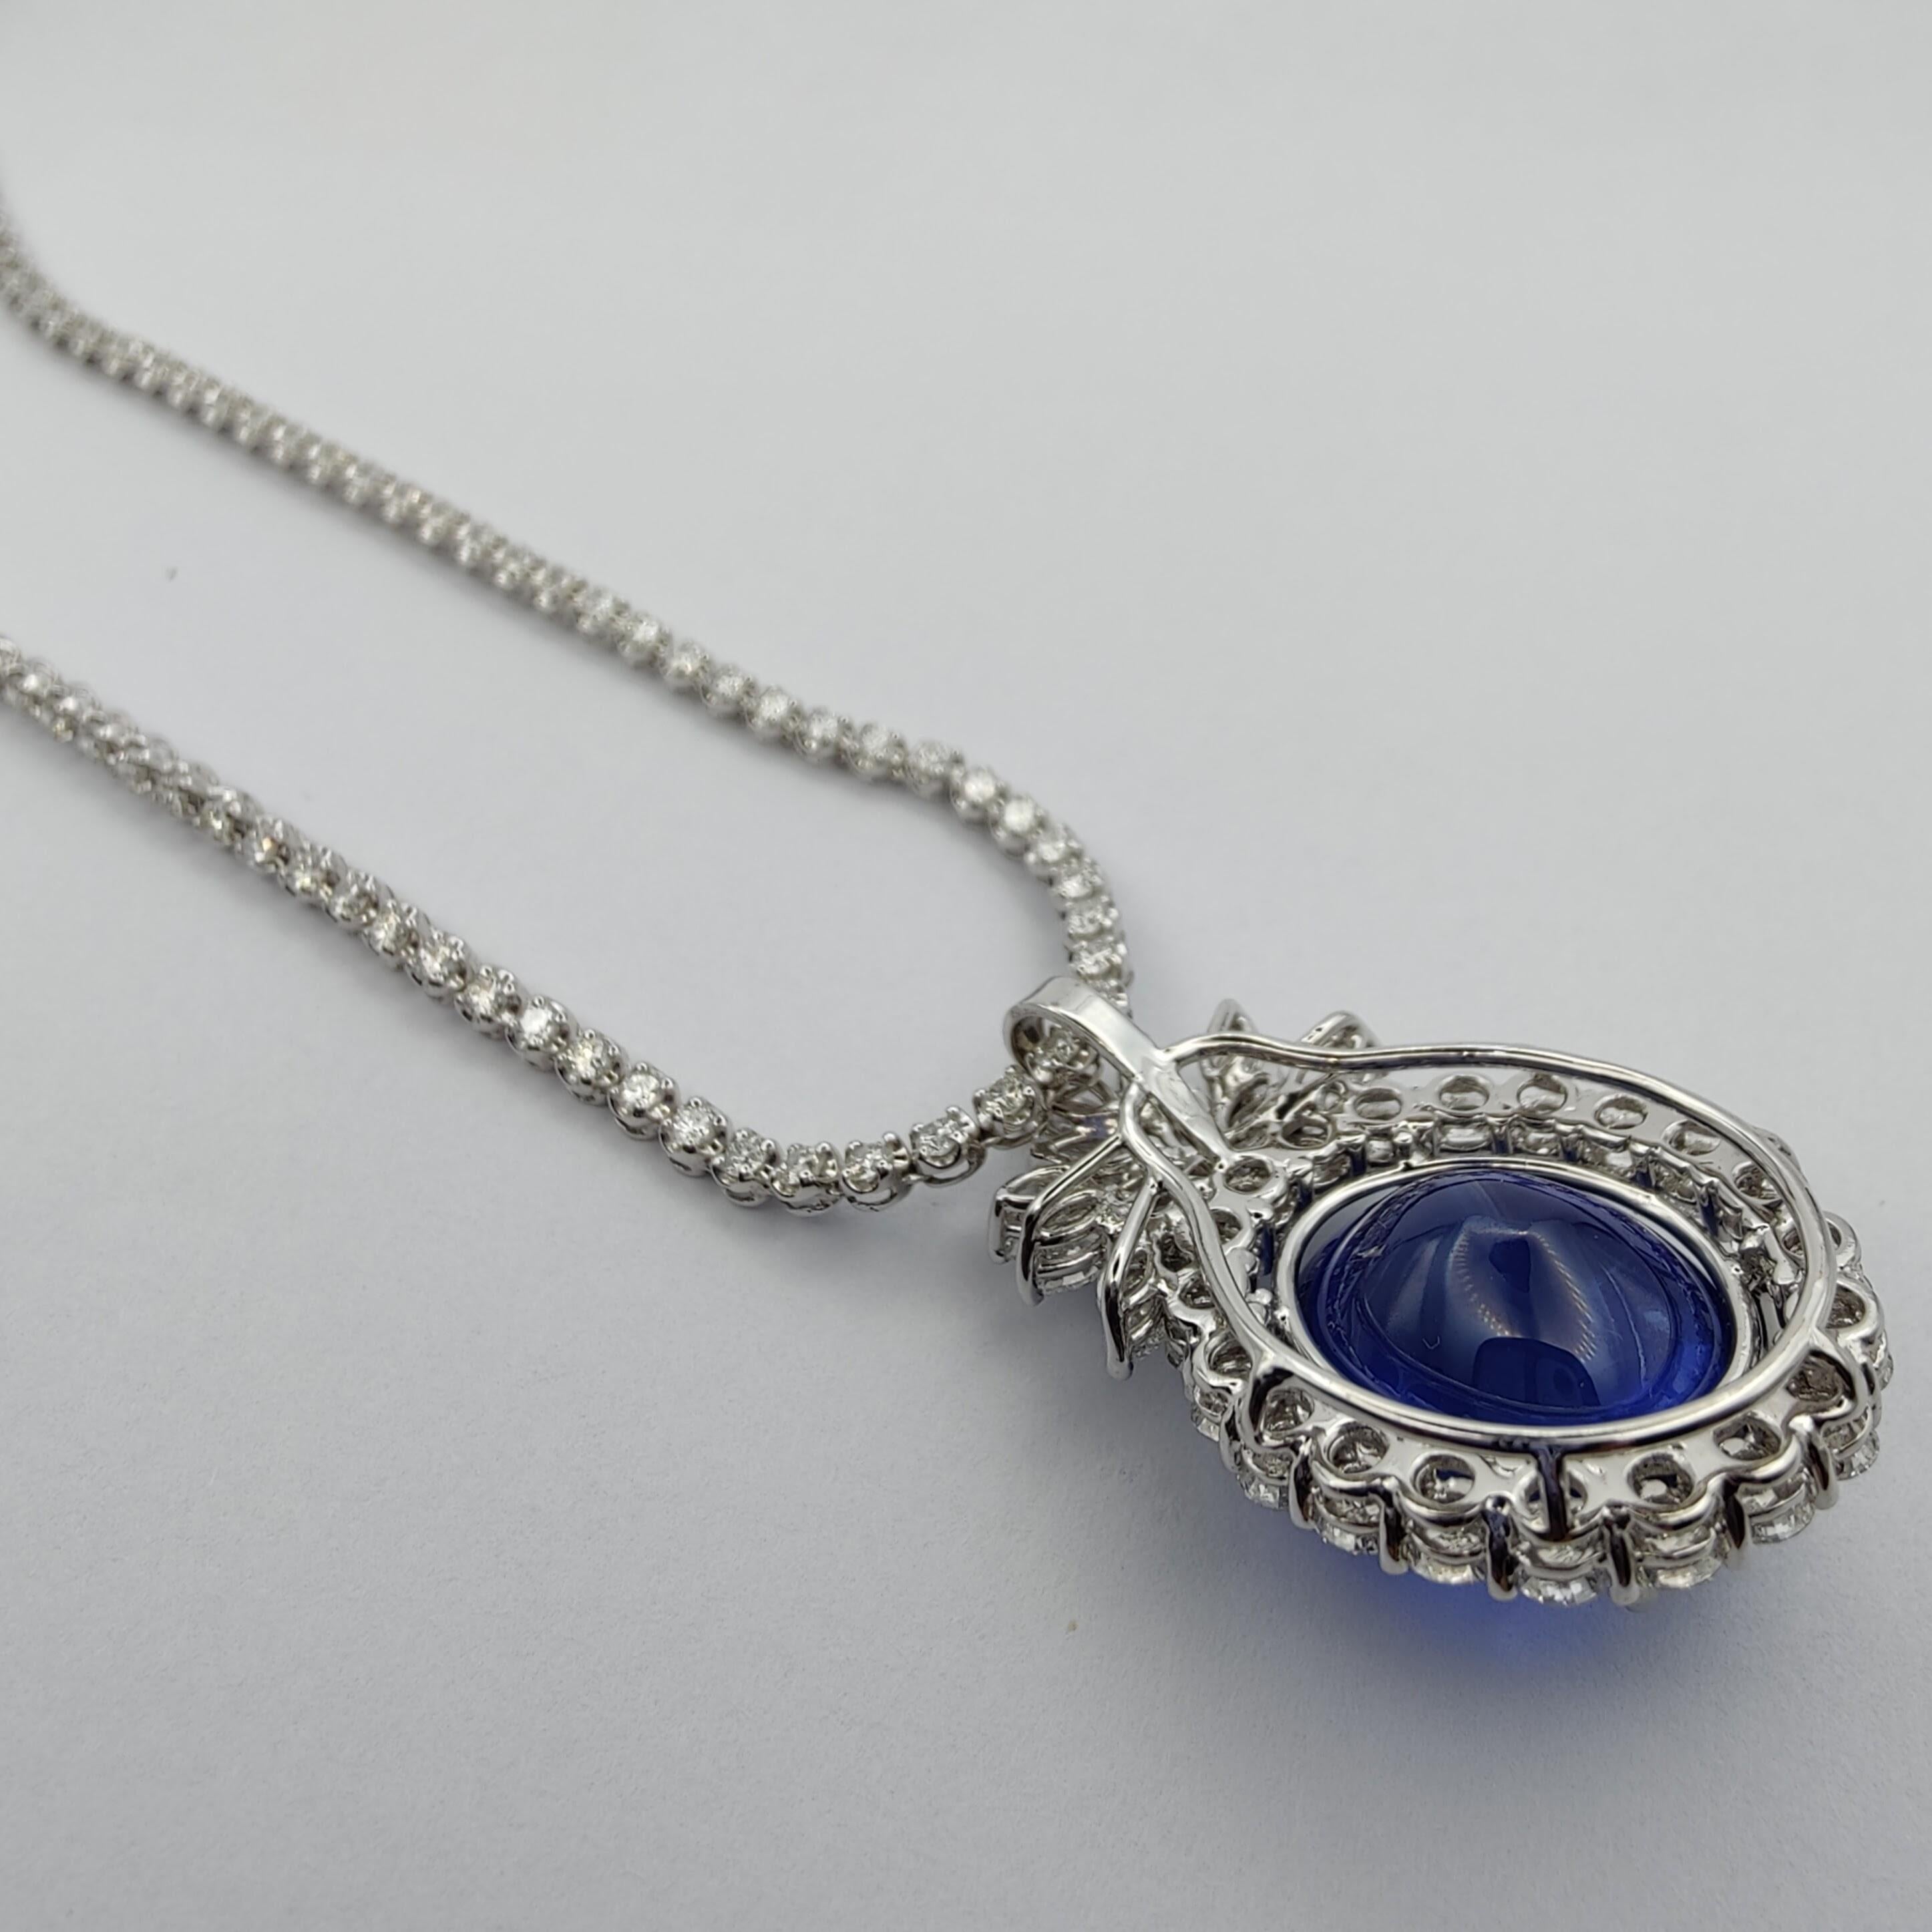 Gublin Certified 26.88ct Unheated Blue Star Sapphire & 7.41ct Diamond Necklace For Sale 5